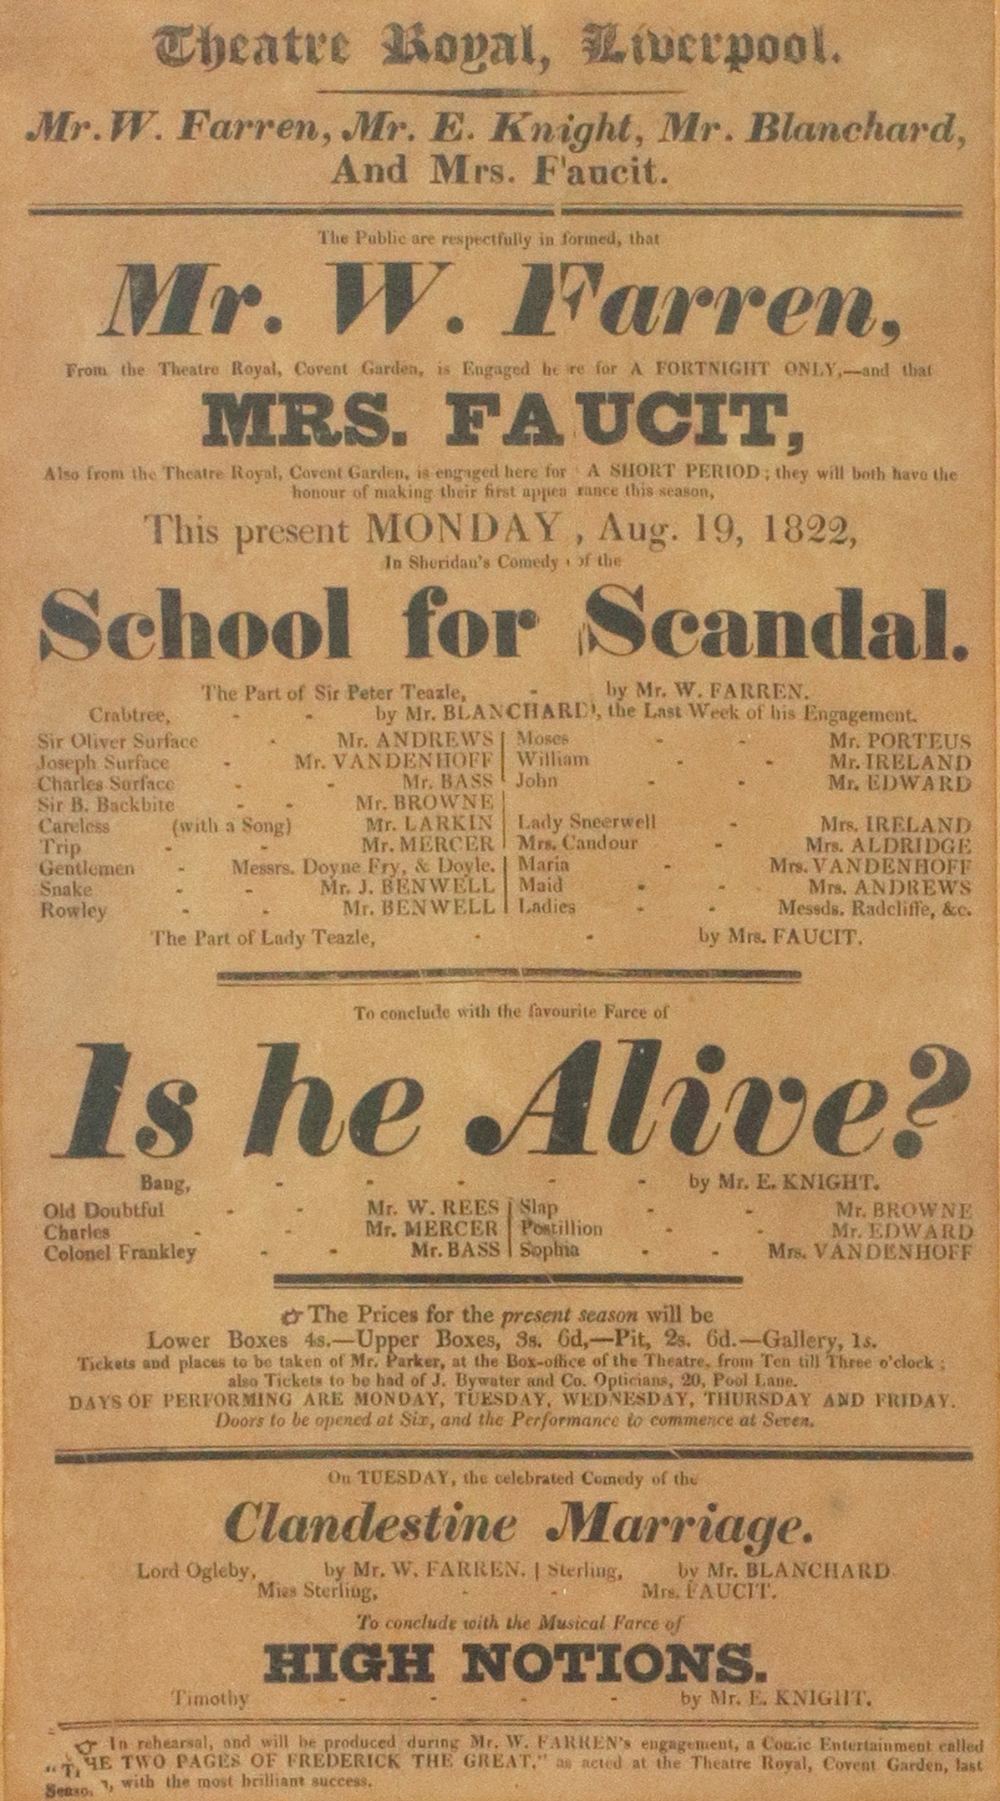 Theatre Bill - Theatre Royal Liverpool, 1822, School for Scandal and Is He Alive?, 31 x 17cm,